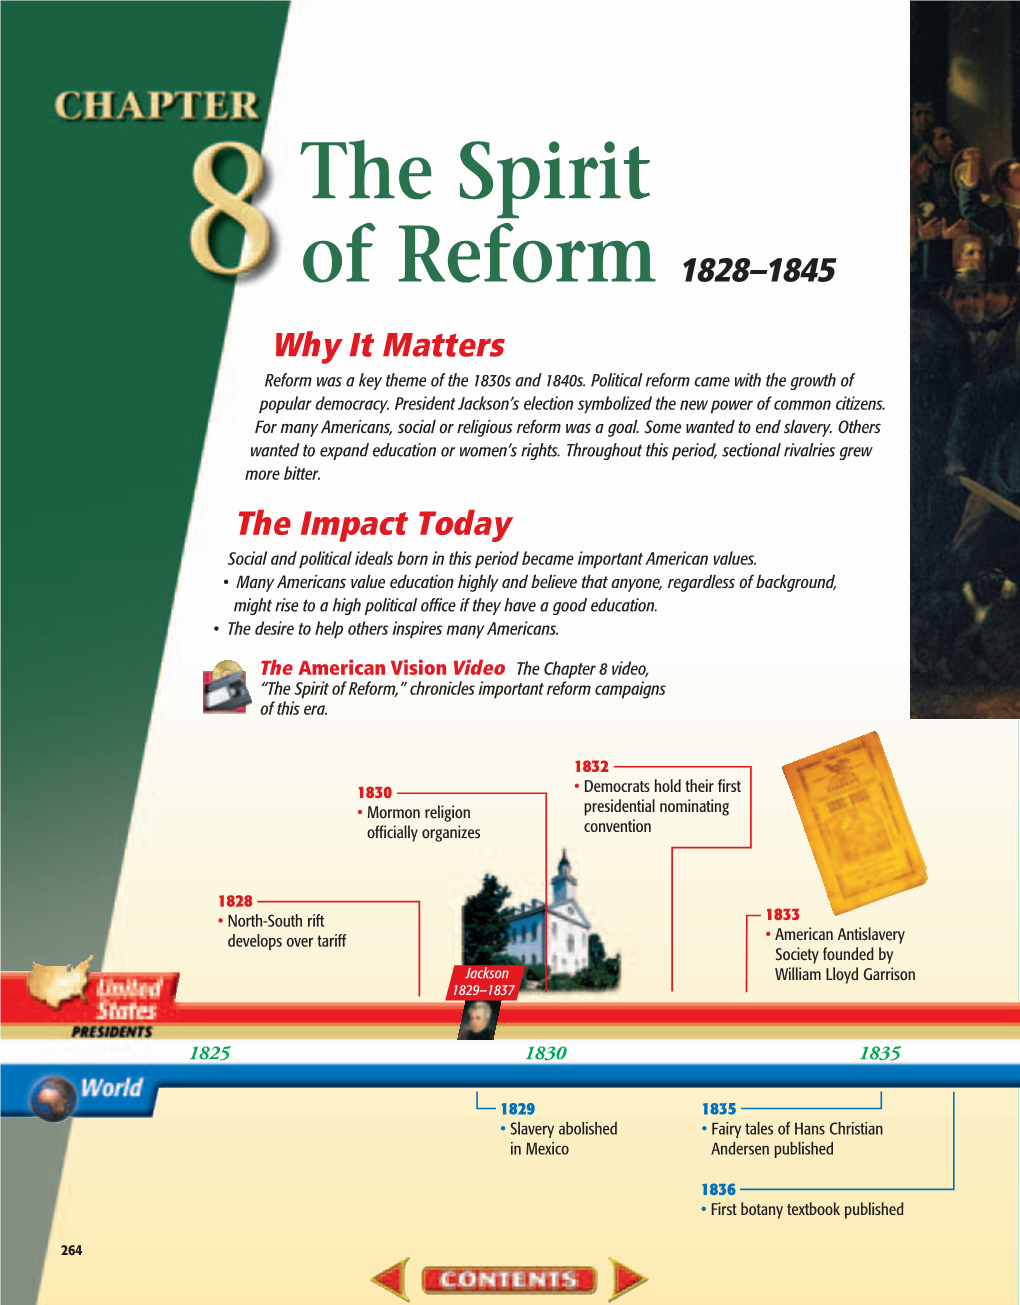 Chapter 8: the Spirit of Reform, 1828-1845